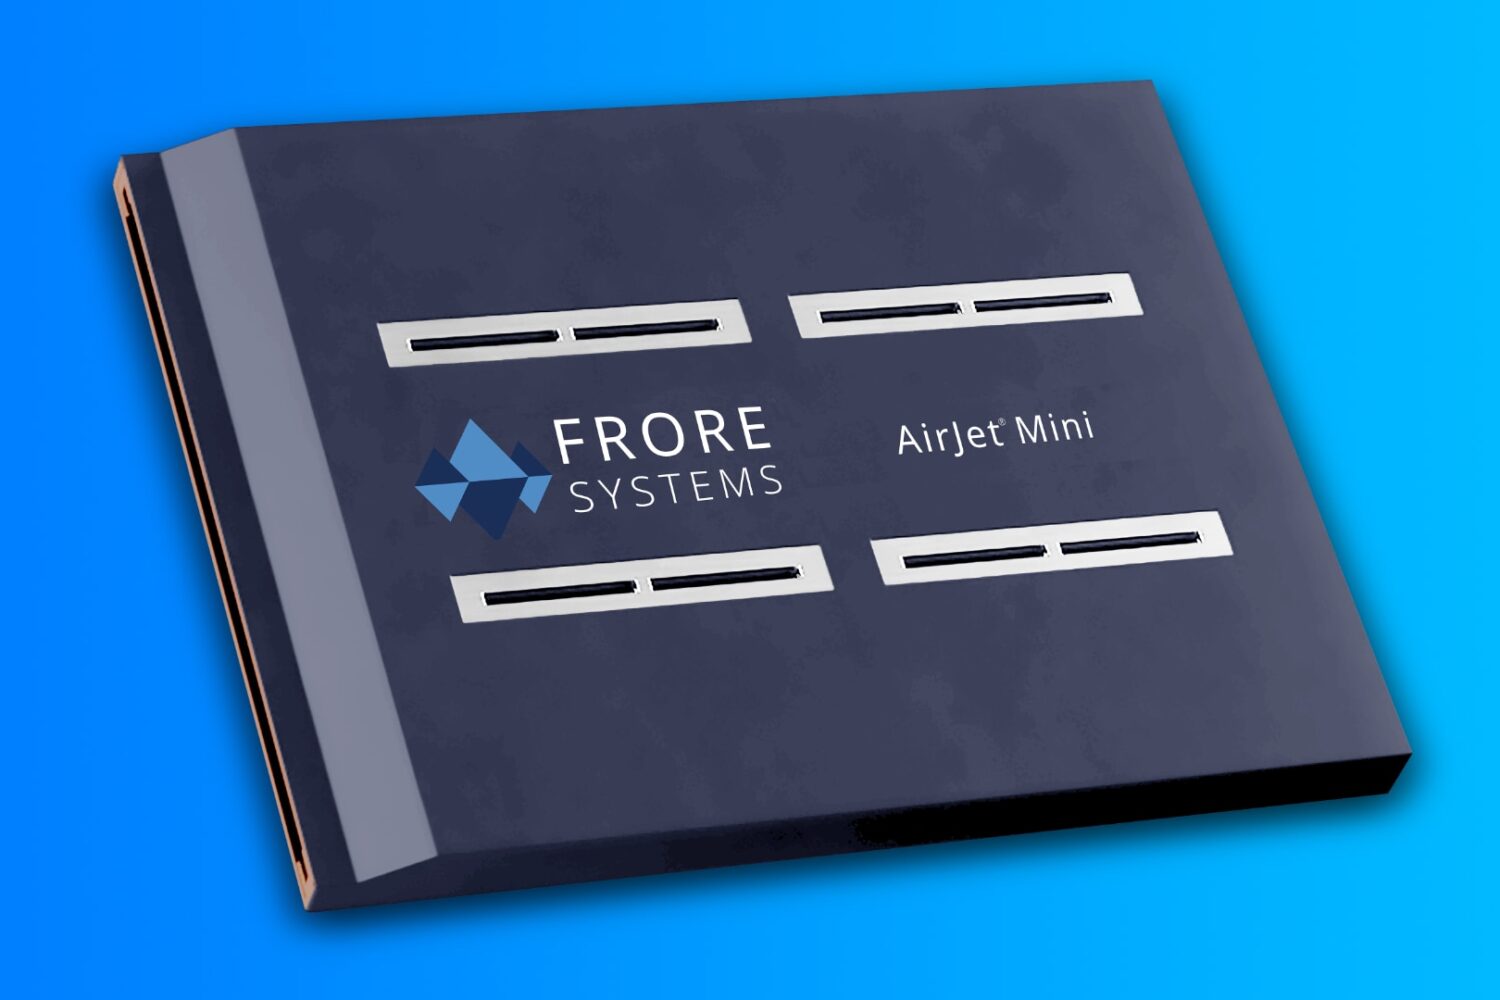 Frore Systems AirJet Mini cooling chip for computers